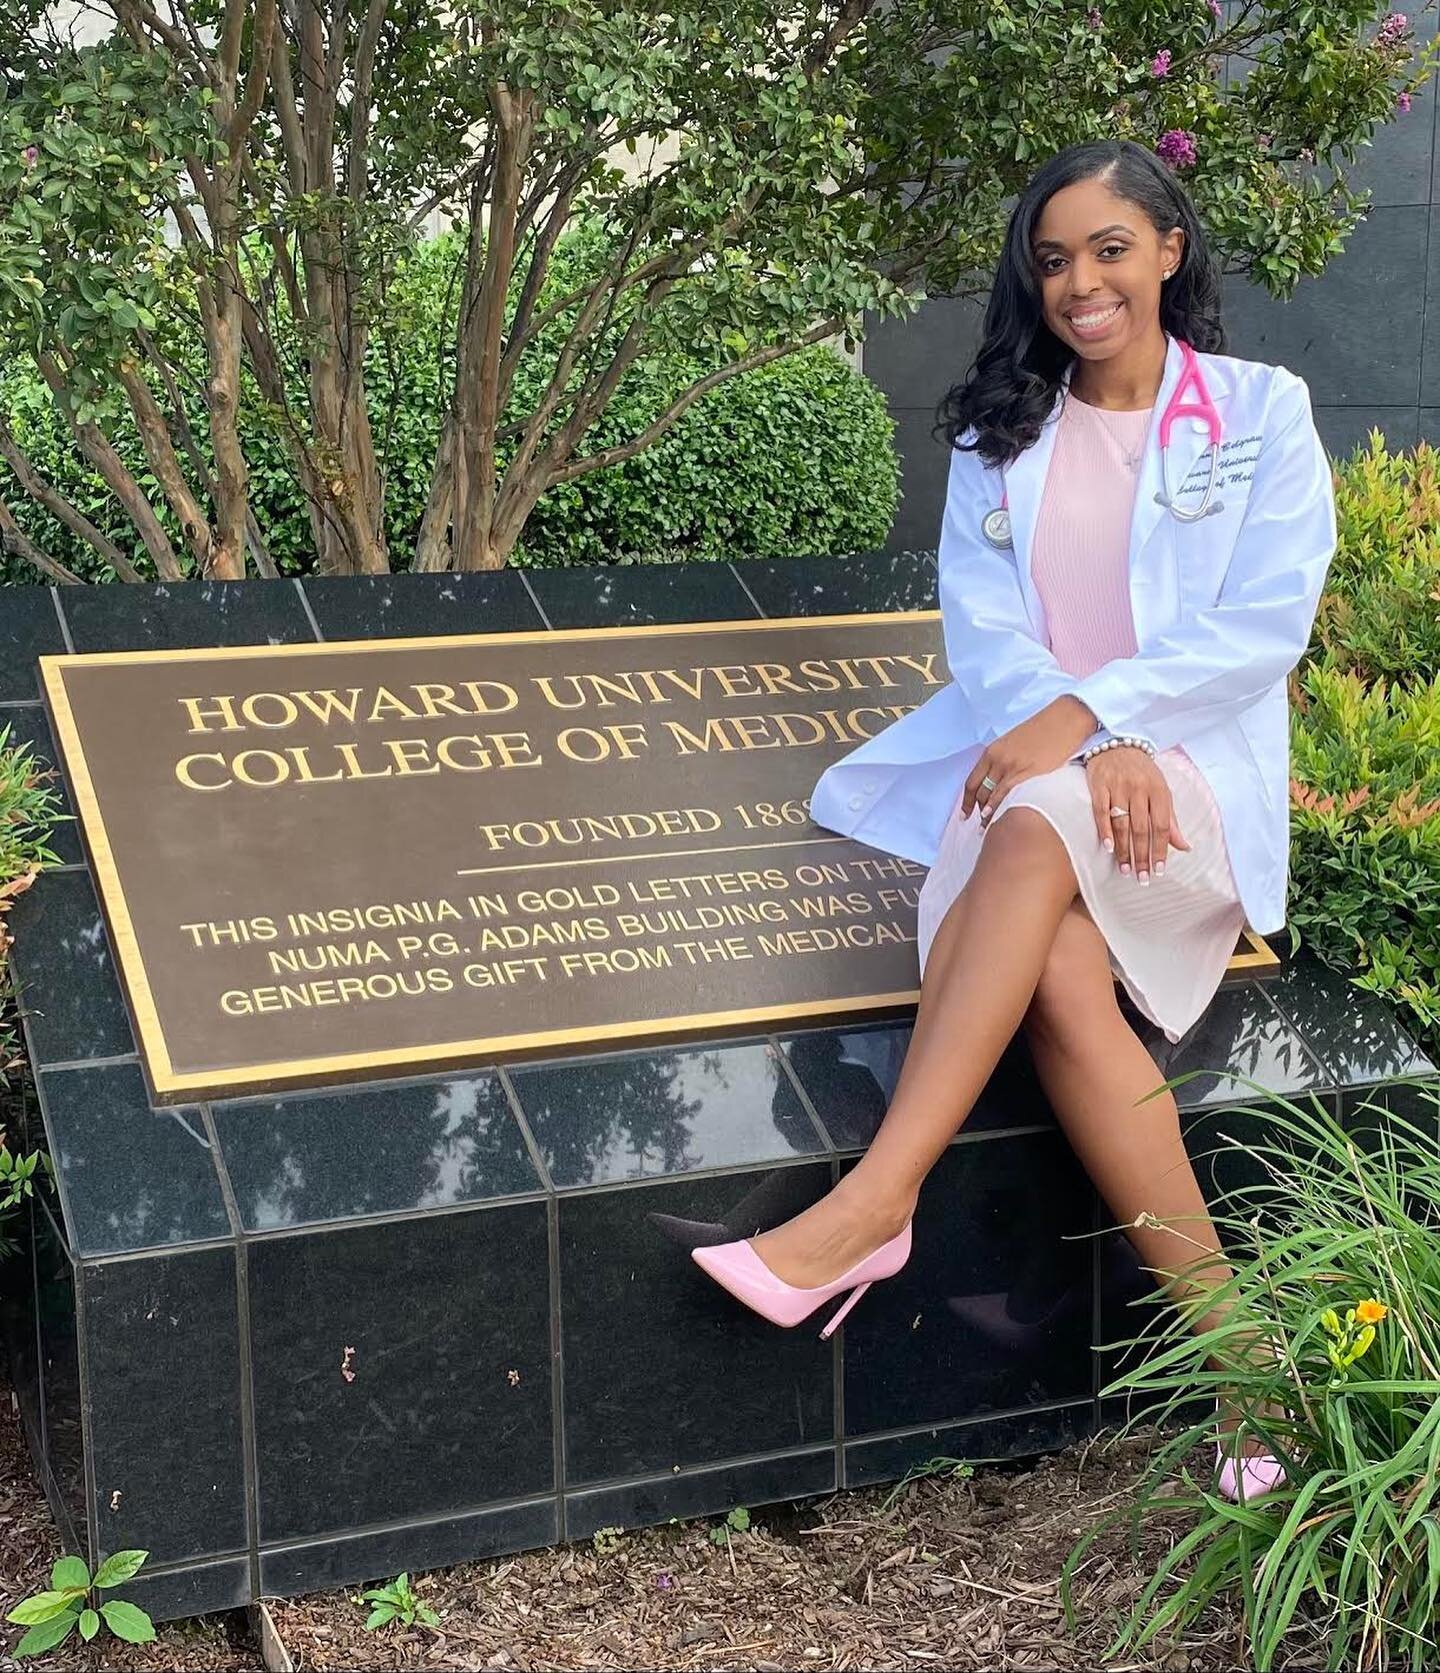 ✨ STUDENT SPOTLIGHT ✨

Name: Brianna Belgrave - Admissions Committee Representative 

Hometown: West Orange, NJ

College/Education: Rutgers University BS in Public Health, George Washington University Masters of Public Health 

Specialty of Interest: